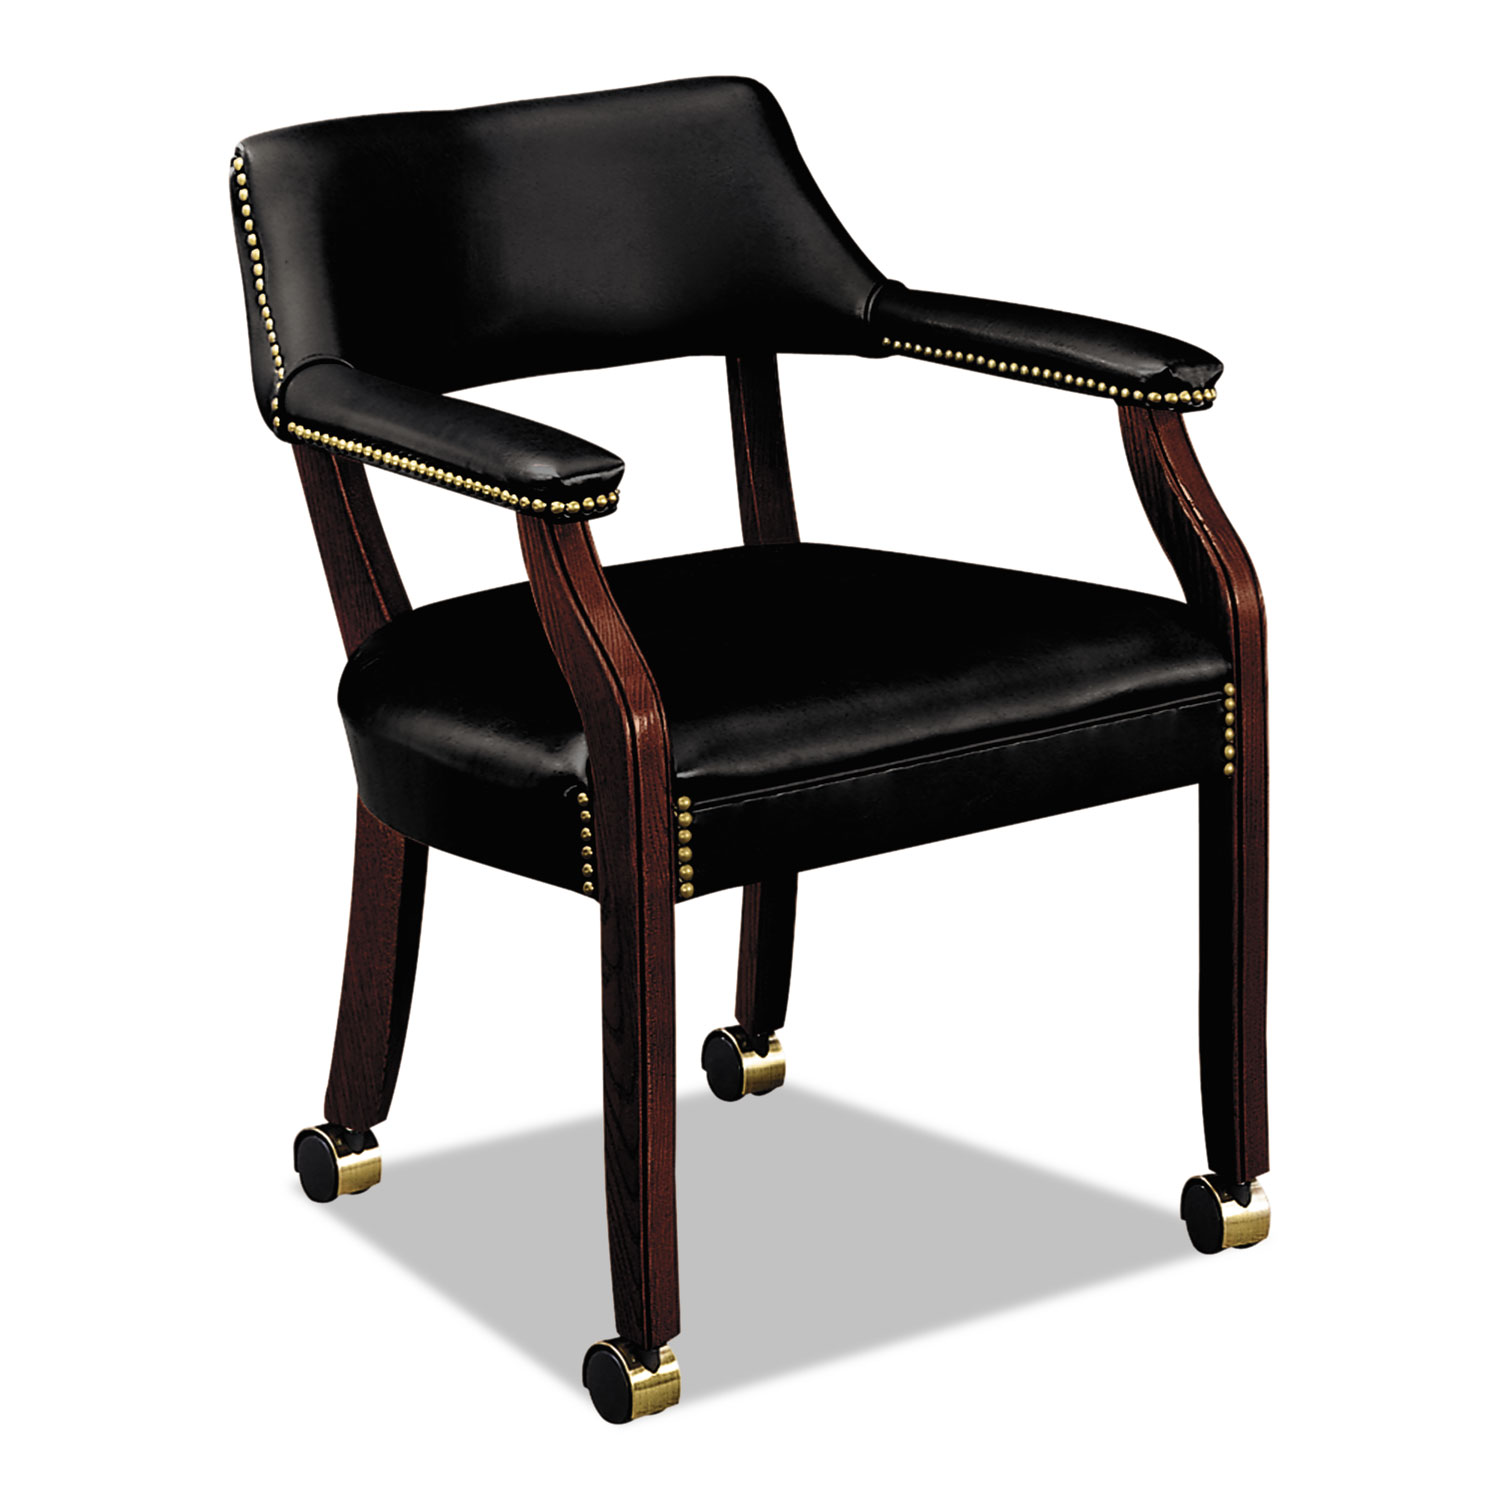 6550 Series Guest Arm Chair with Casters, Mahogany/Black Vinyl Upholstery